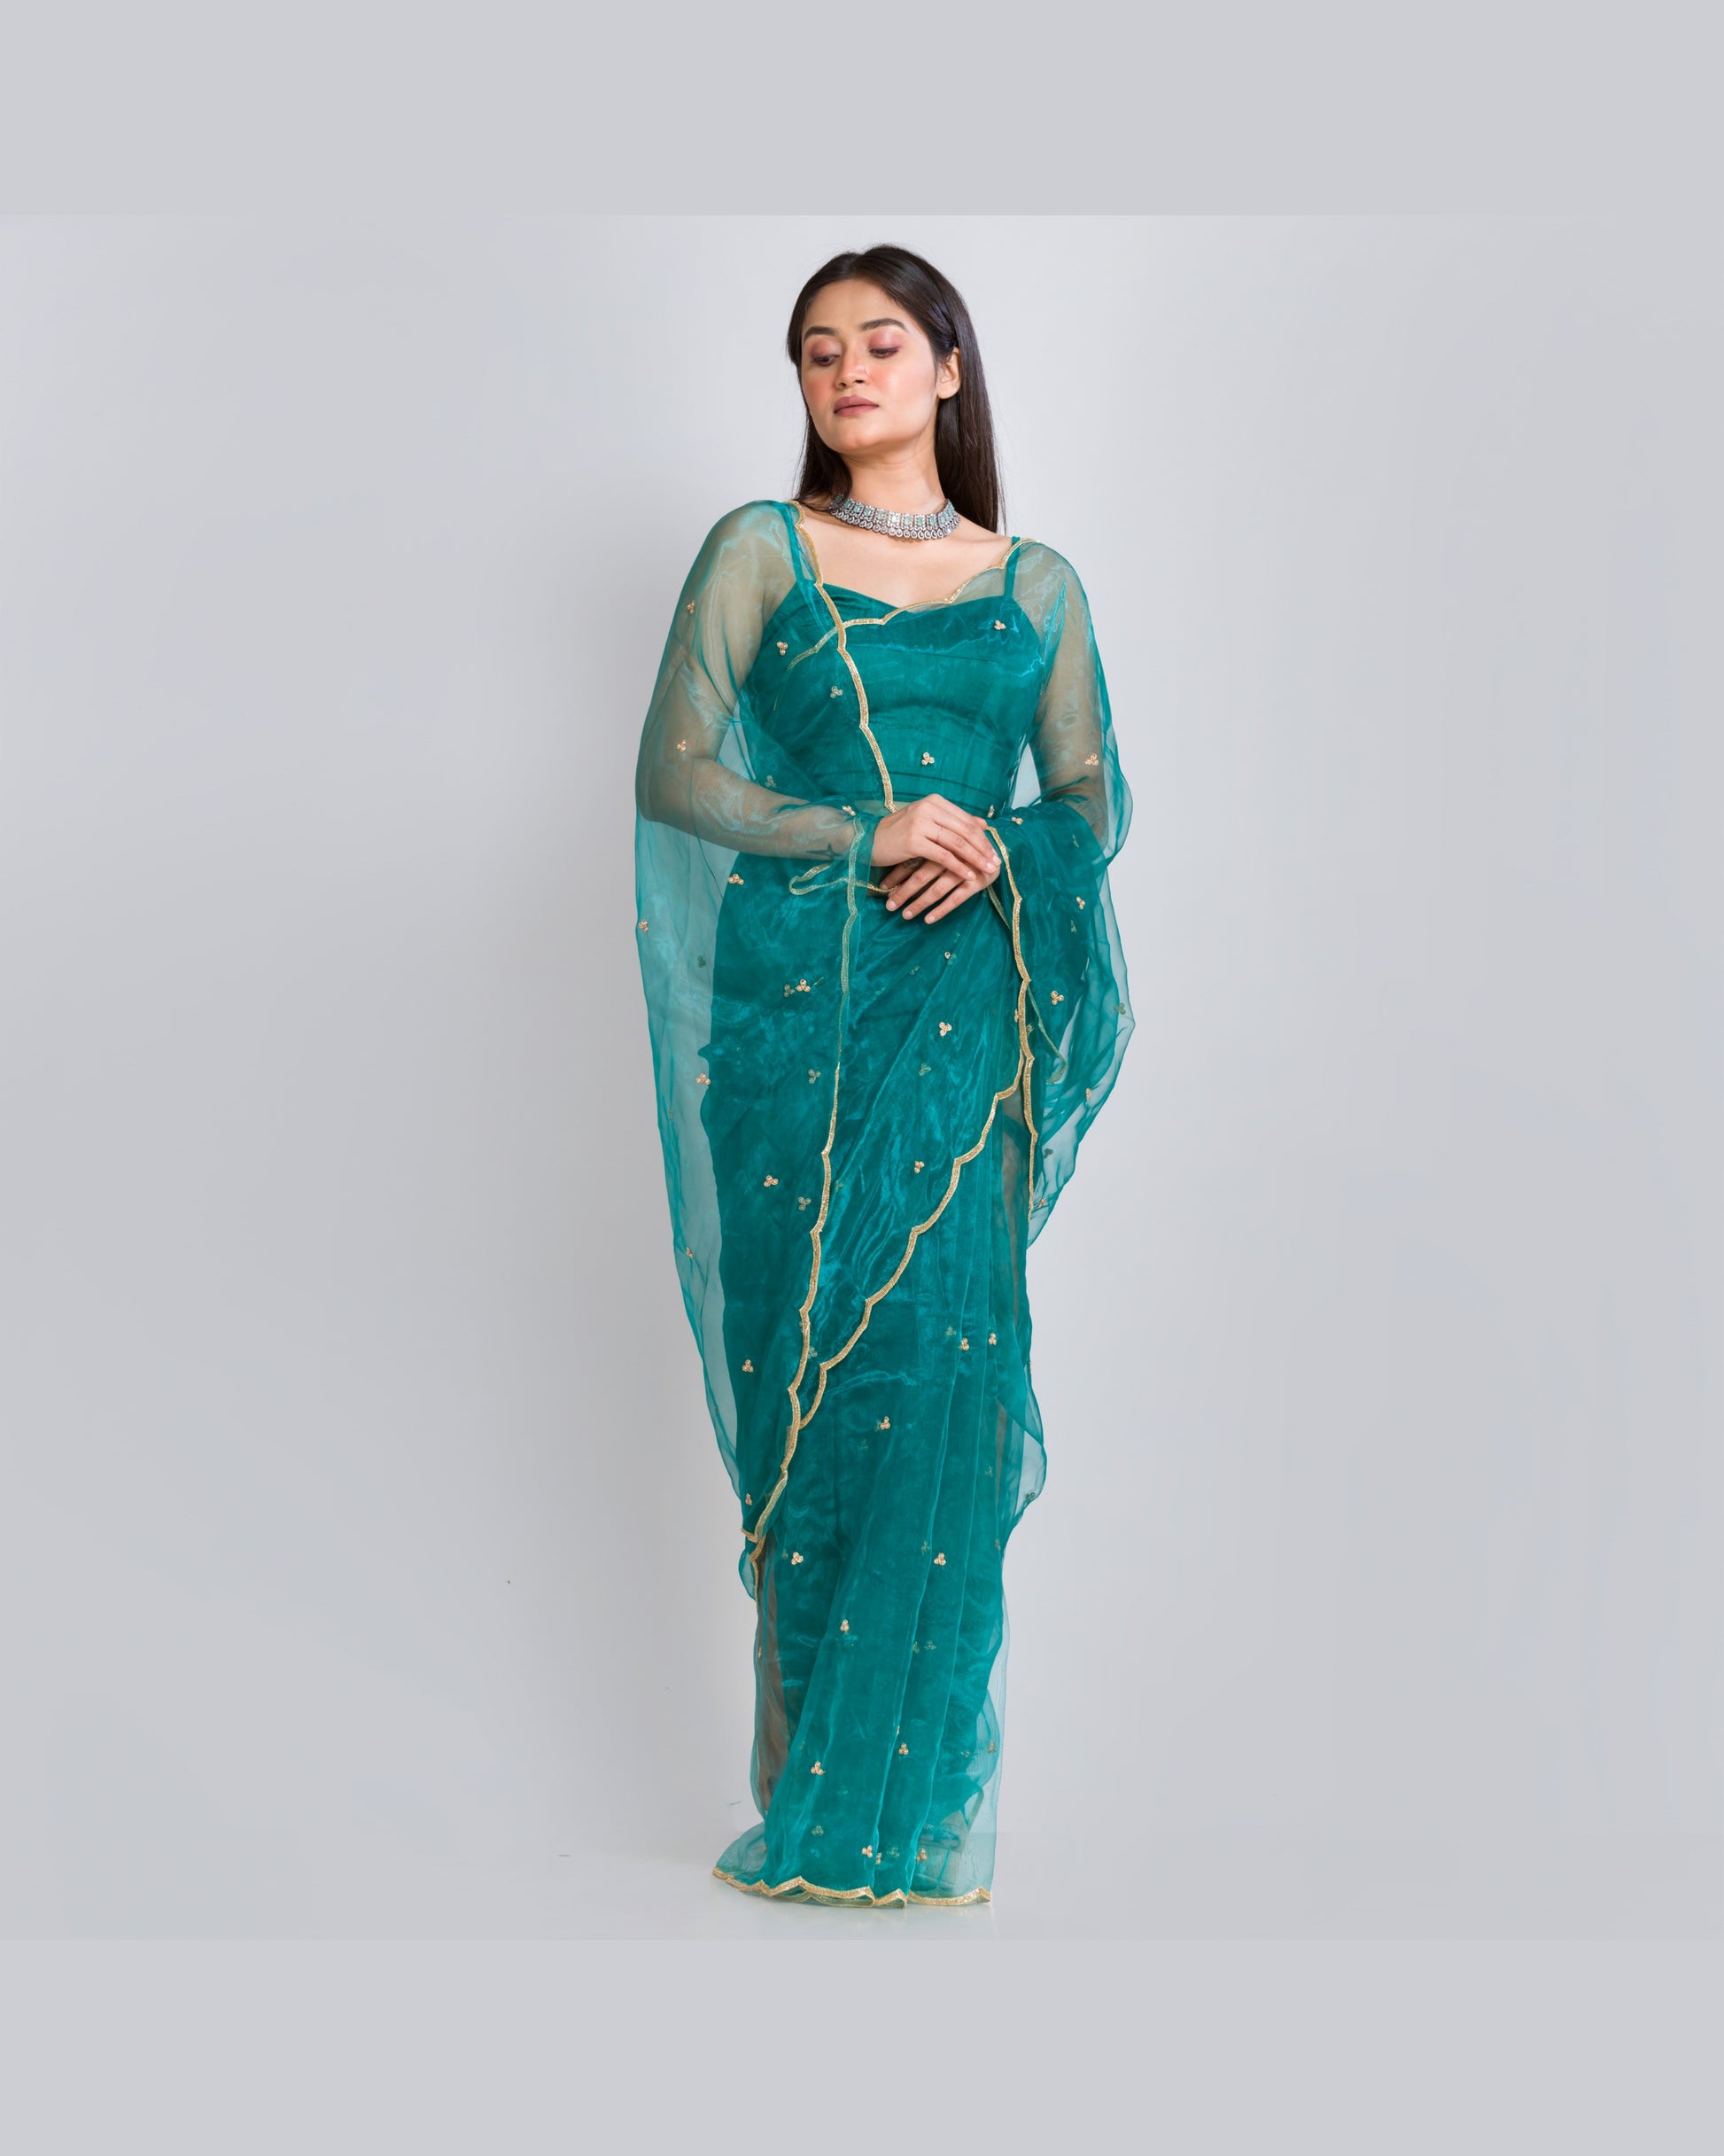 Teal Blue Glass Tissue Saree With Handembroidered Scalloping - kreationbykj